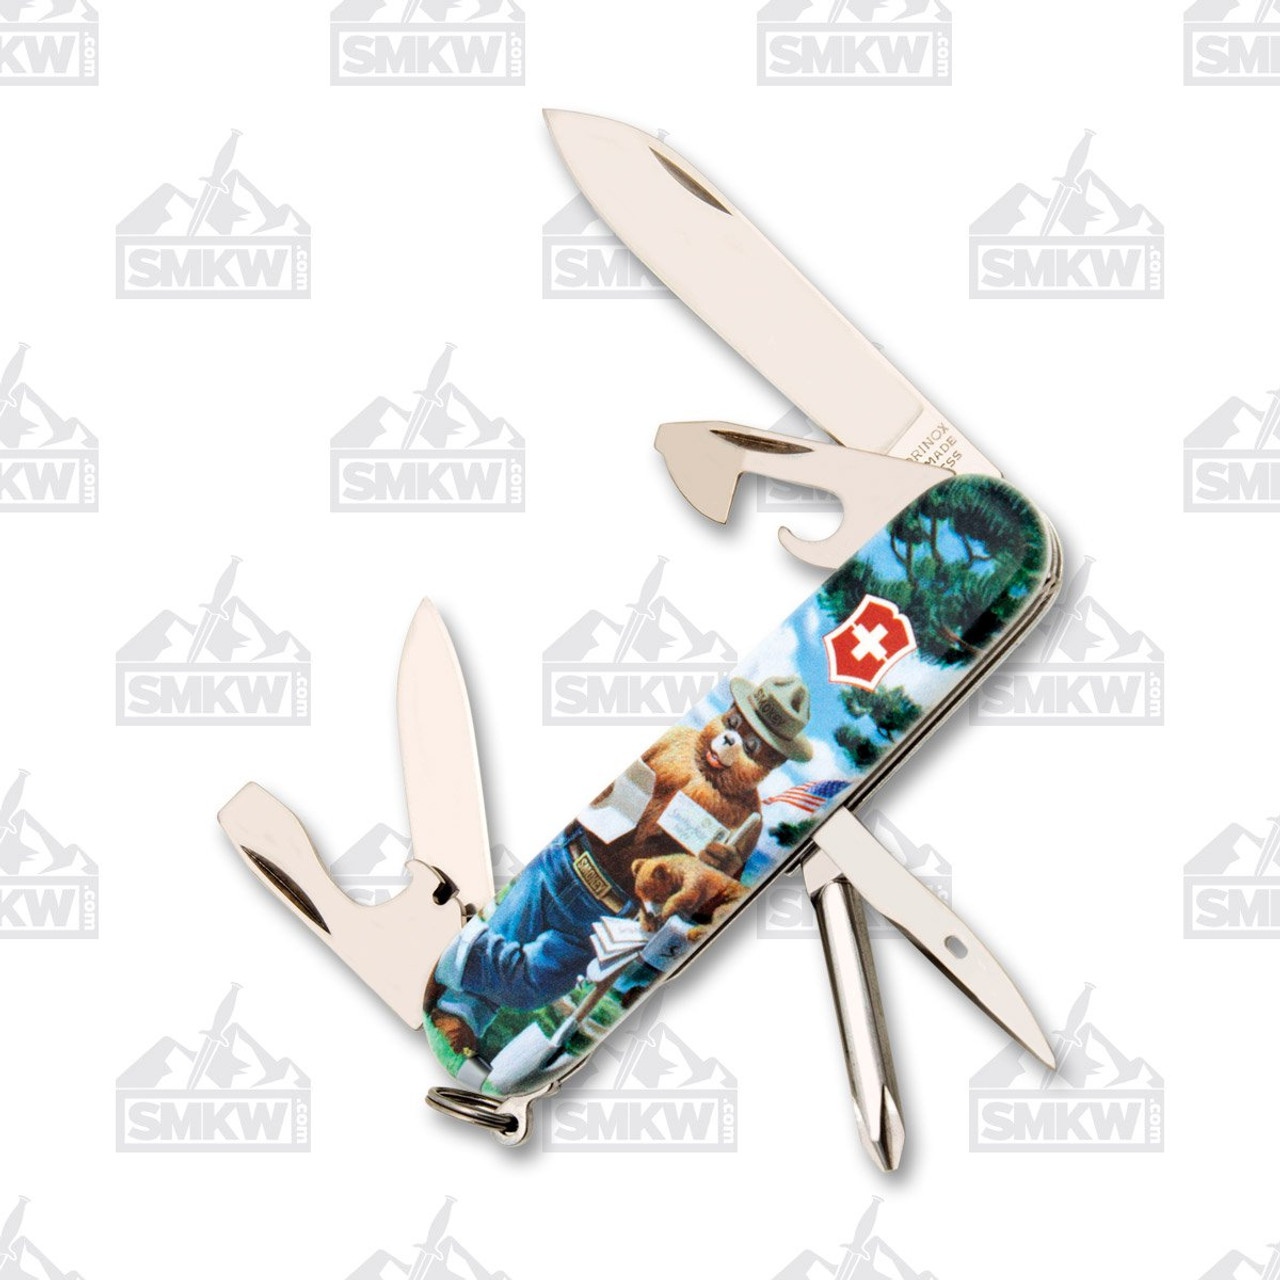 Victorinox Classic SD White - Way Of Knife & EDC Gear House